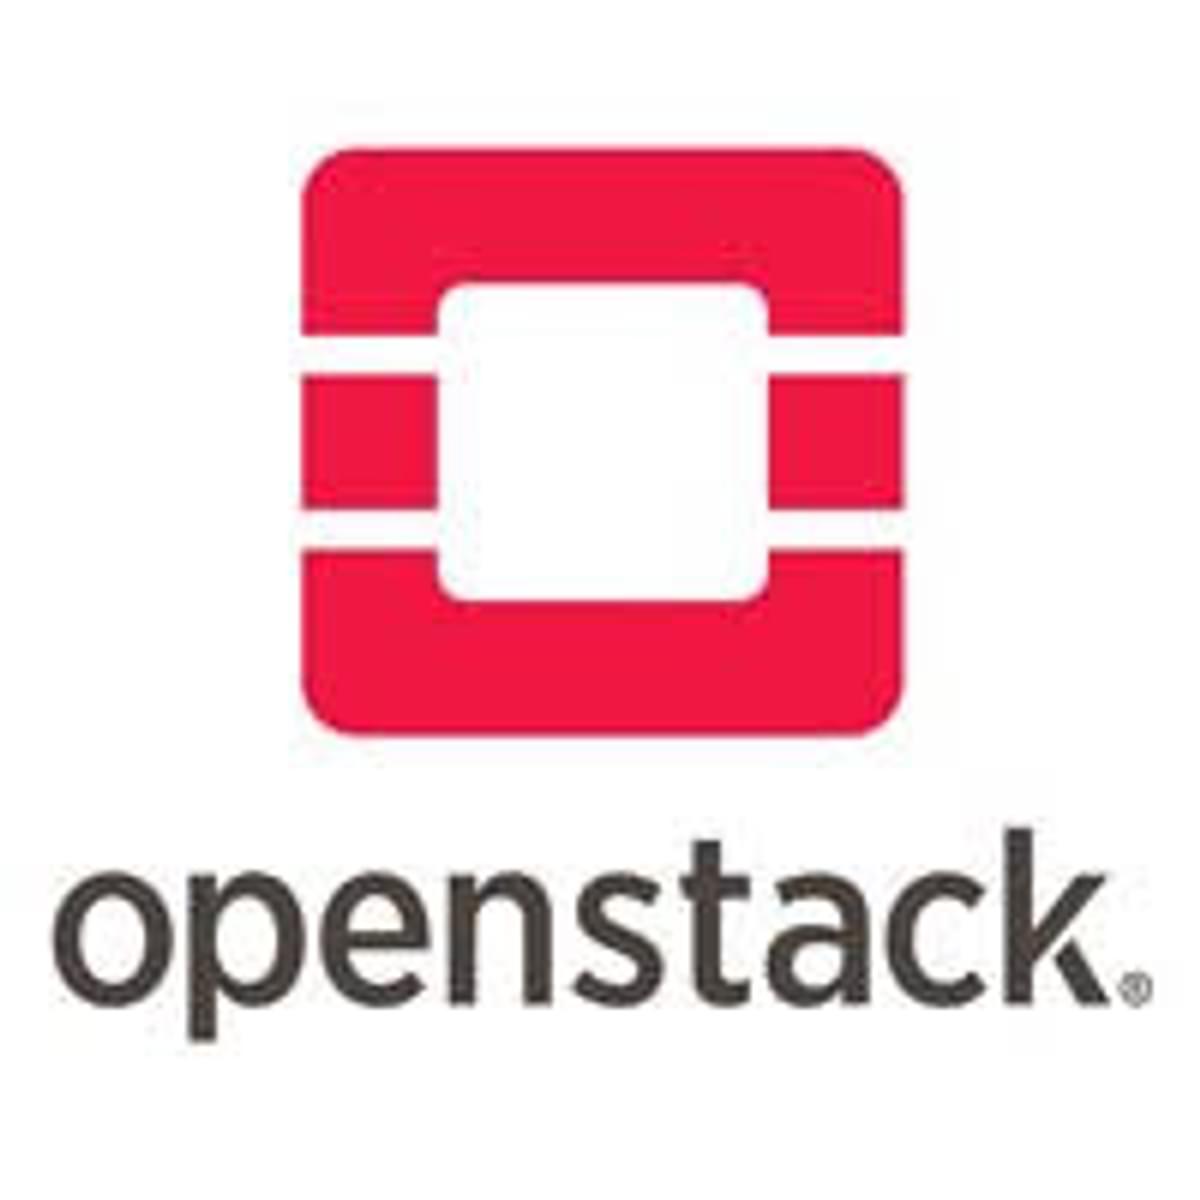 StarlingX benoemt tot Top-Level Open Stack Foundation Project image